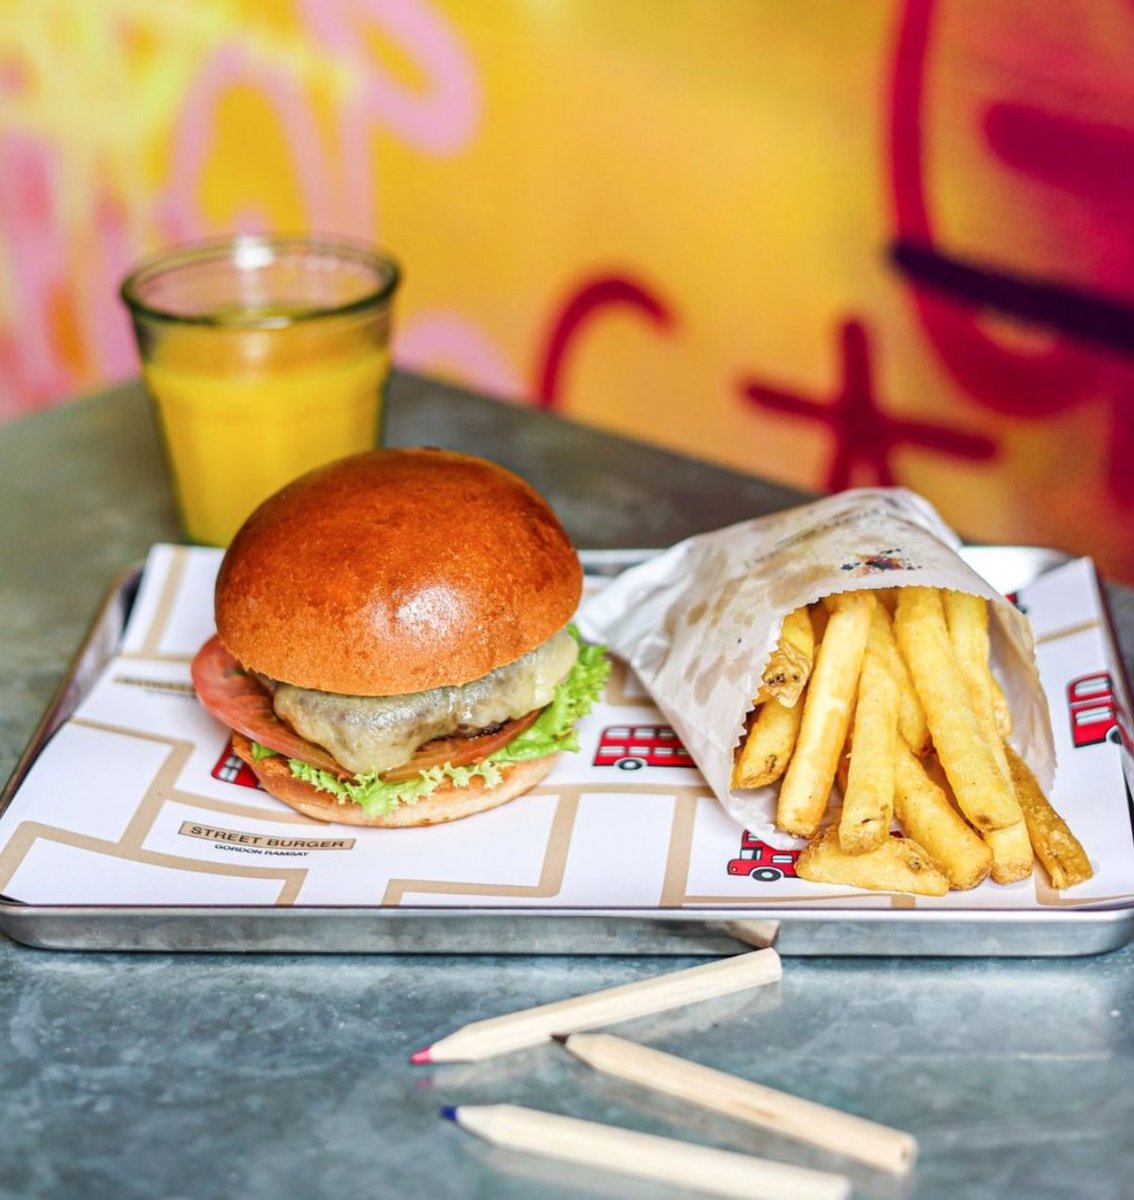 This Easter Holidays treat the whole family to our amazing frites and of course an amazing Gordon Ramsay Street Burger.. not to be missed.. #frites #fries #foodservice #restaurants #gordonramsayburger @gordonramsaystreetburger #chefs #chef #chips #burgers #london #uk #streetfood https://t.co/laIMN7VetJ